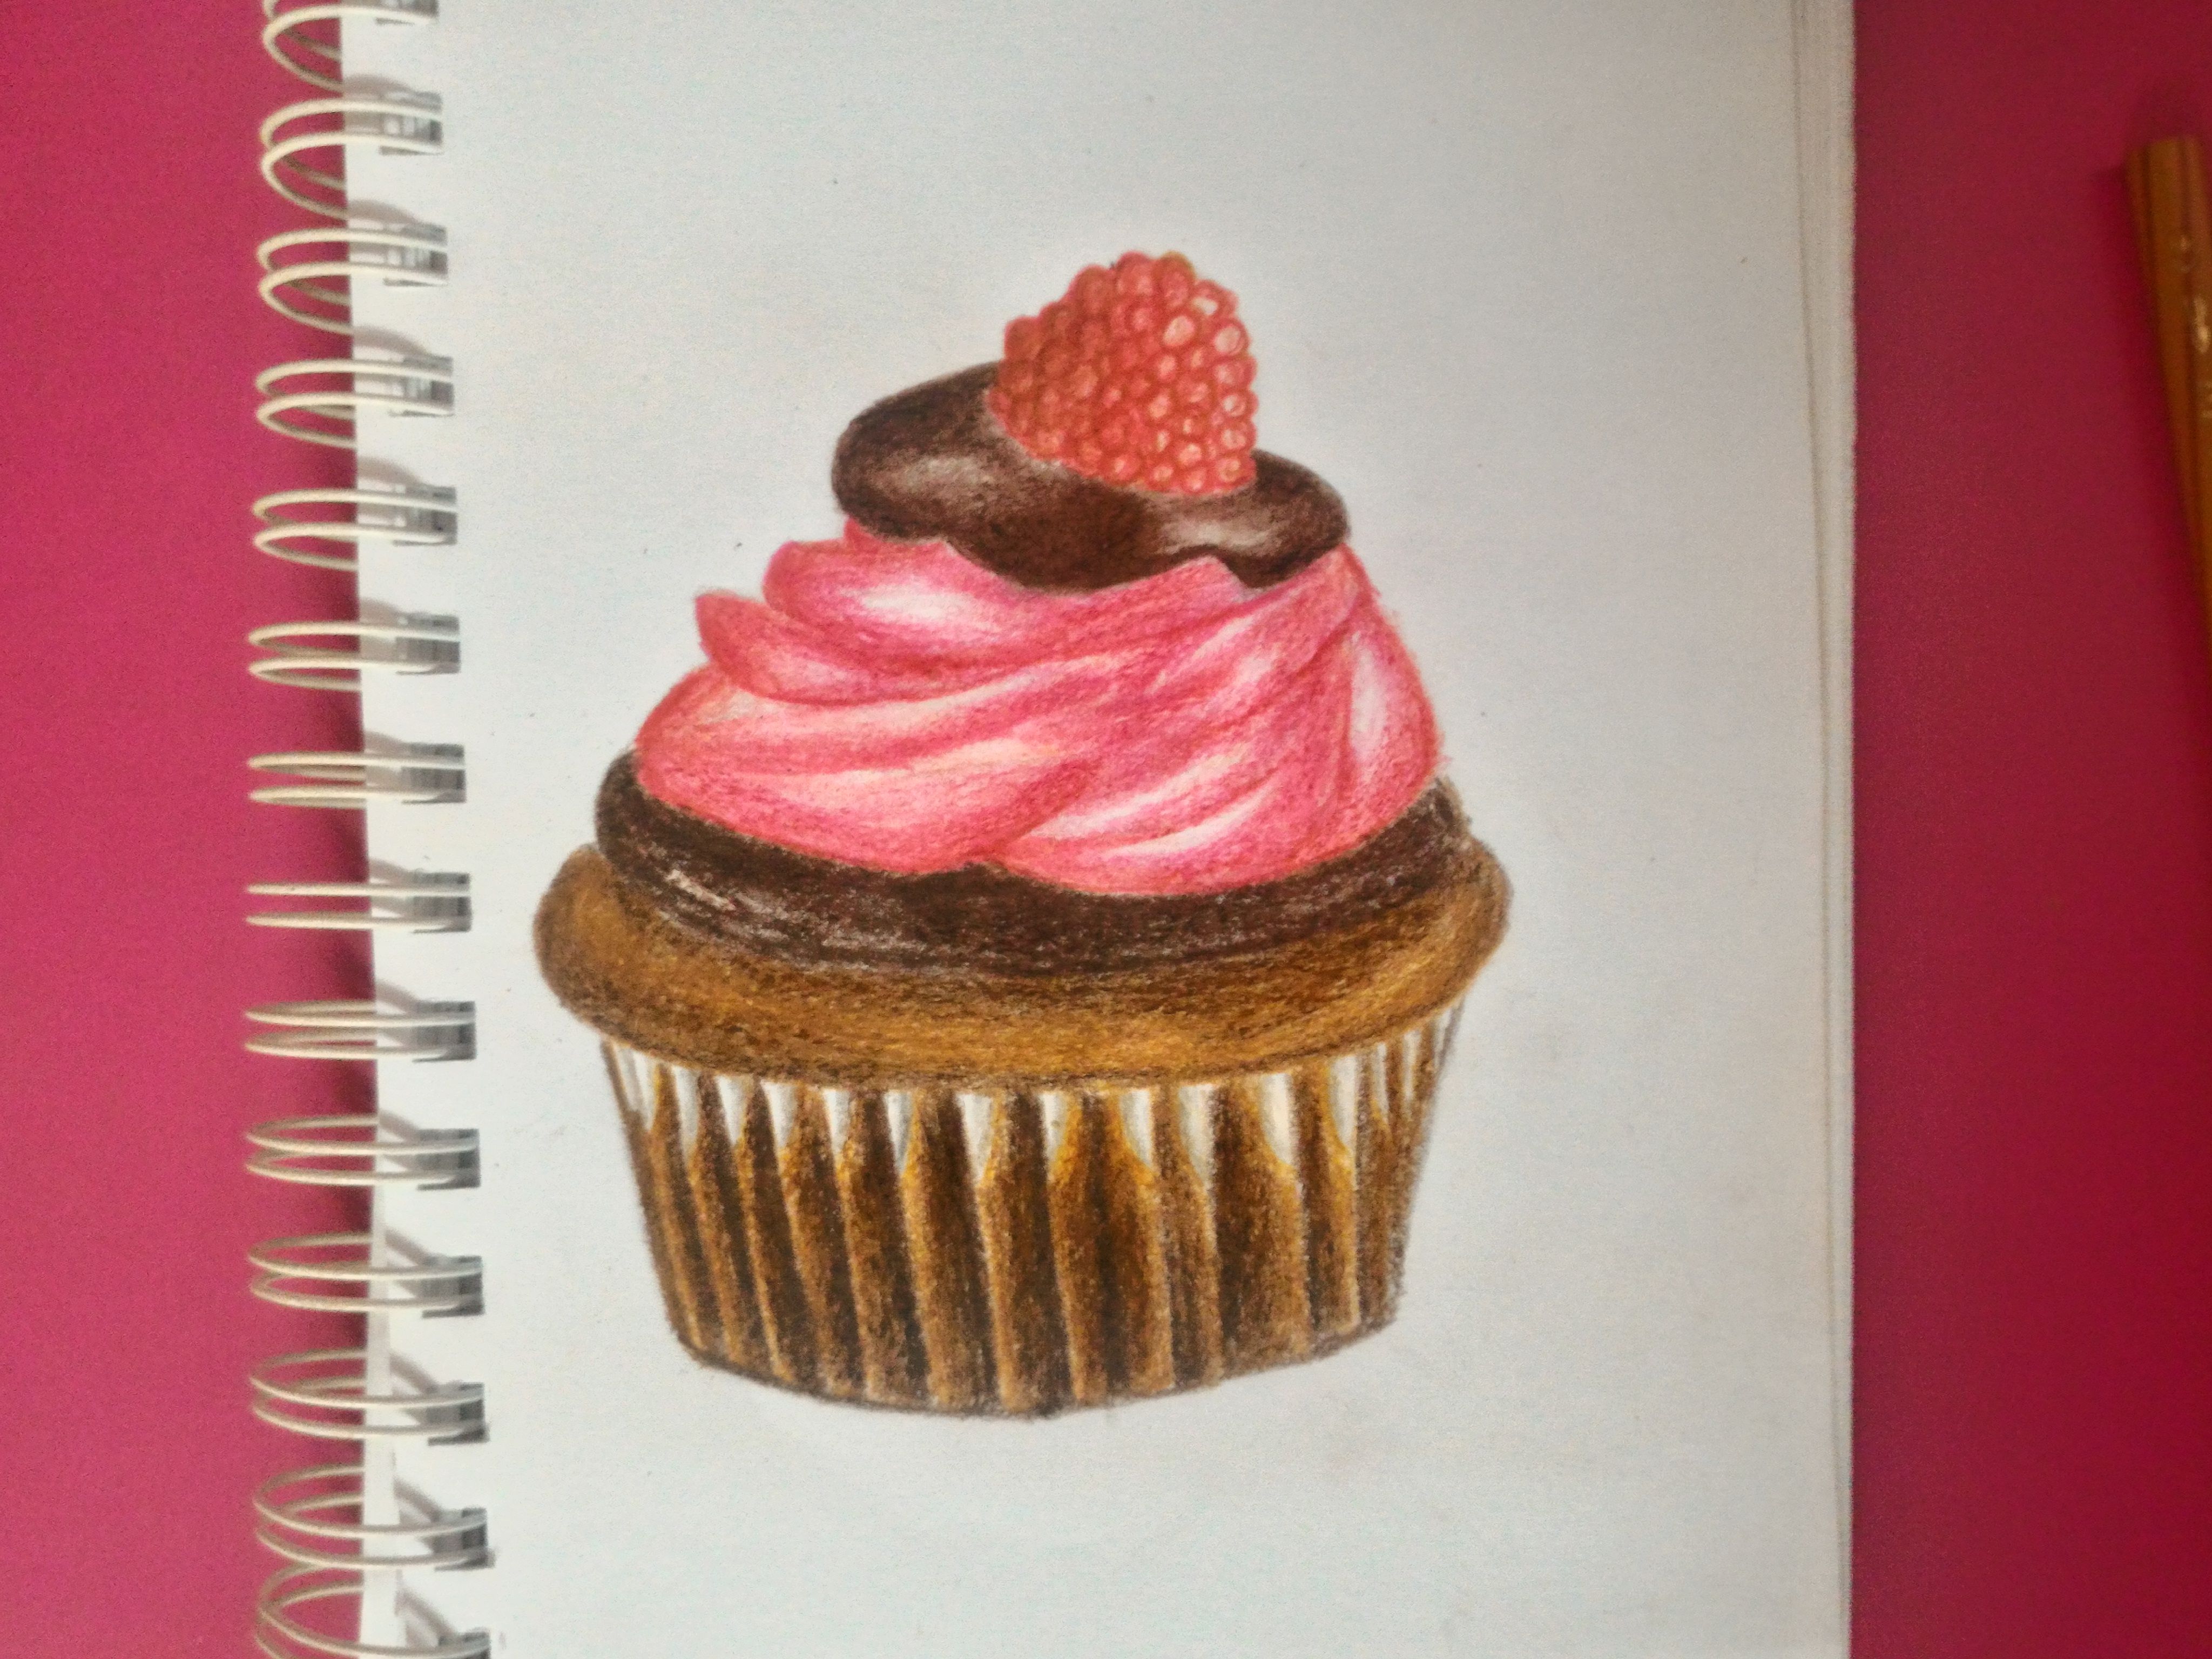 How to Draw a CHOCOLATE CUPCAKE - YouTube